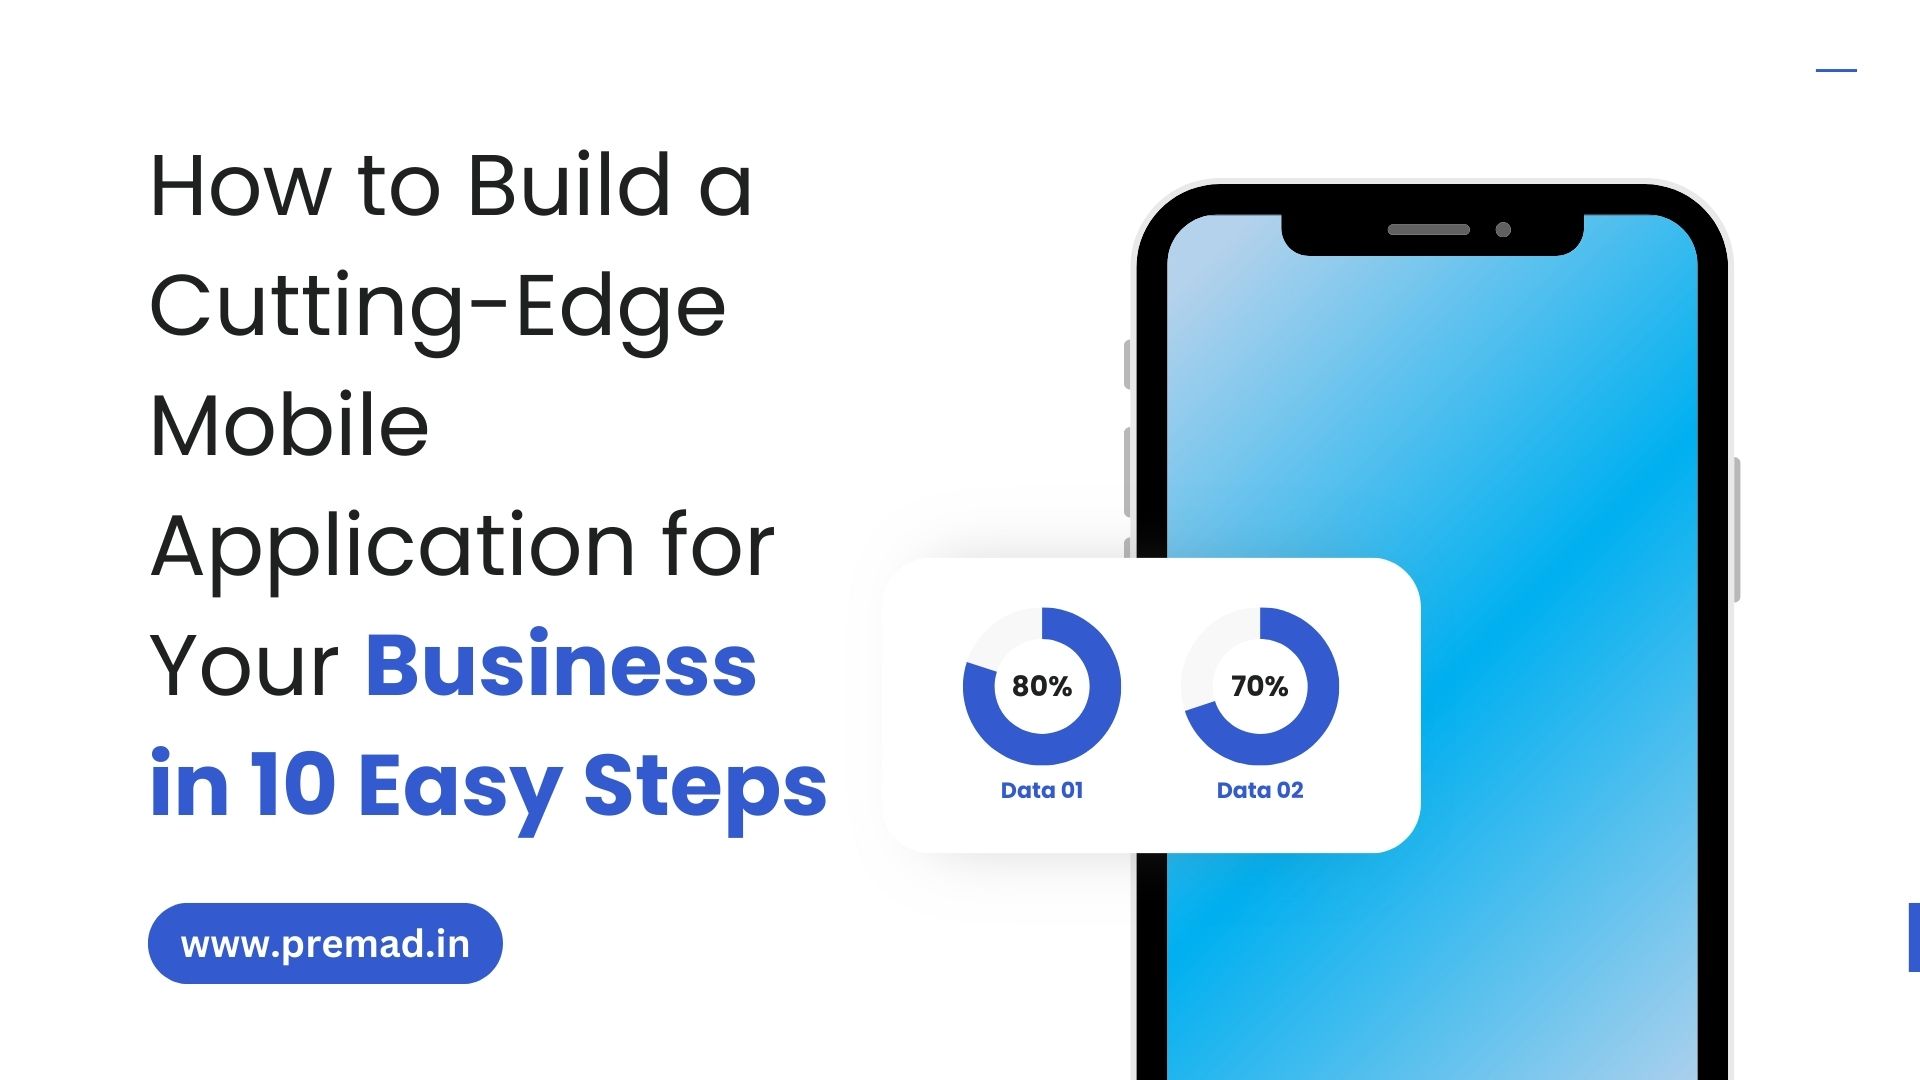 How to Build a Cutting-Edge Mobile Application for Your Business in 10 Easy Steps